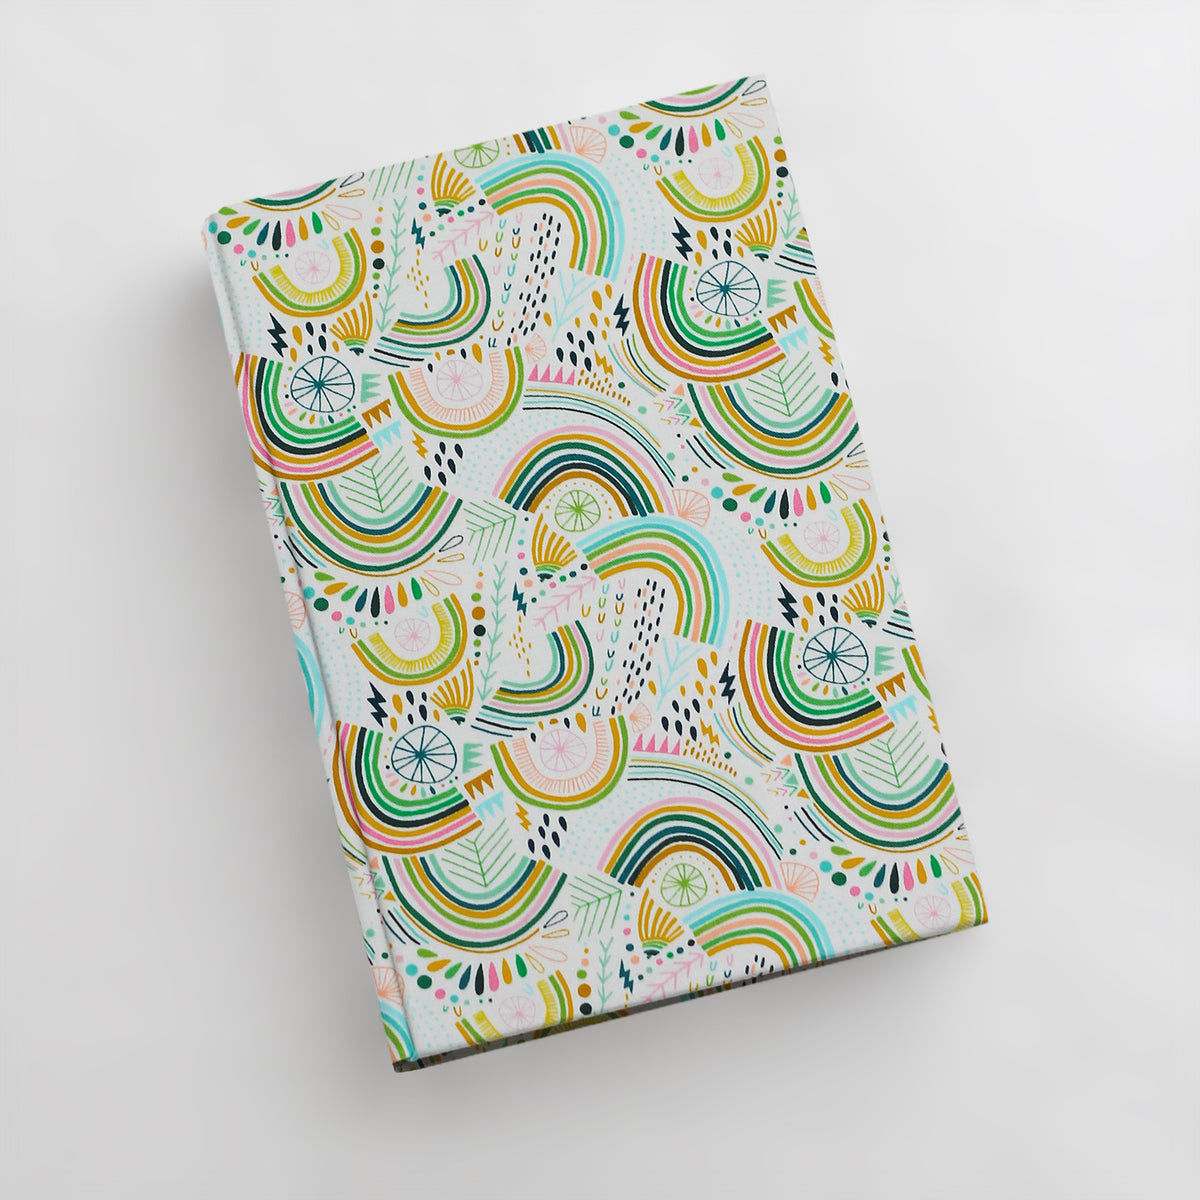 Medium Blank Page Journal with Rainbow Cover